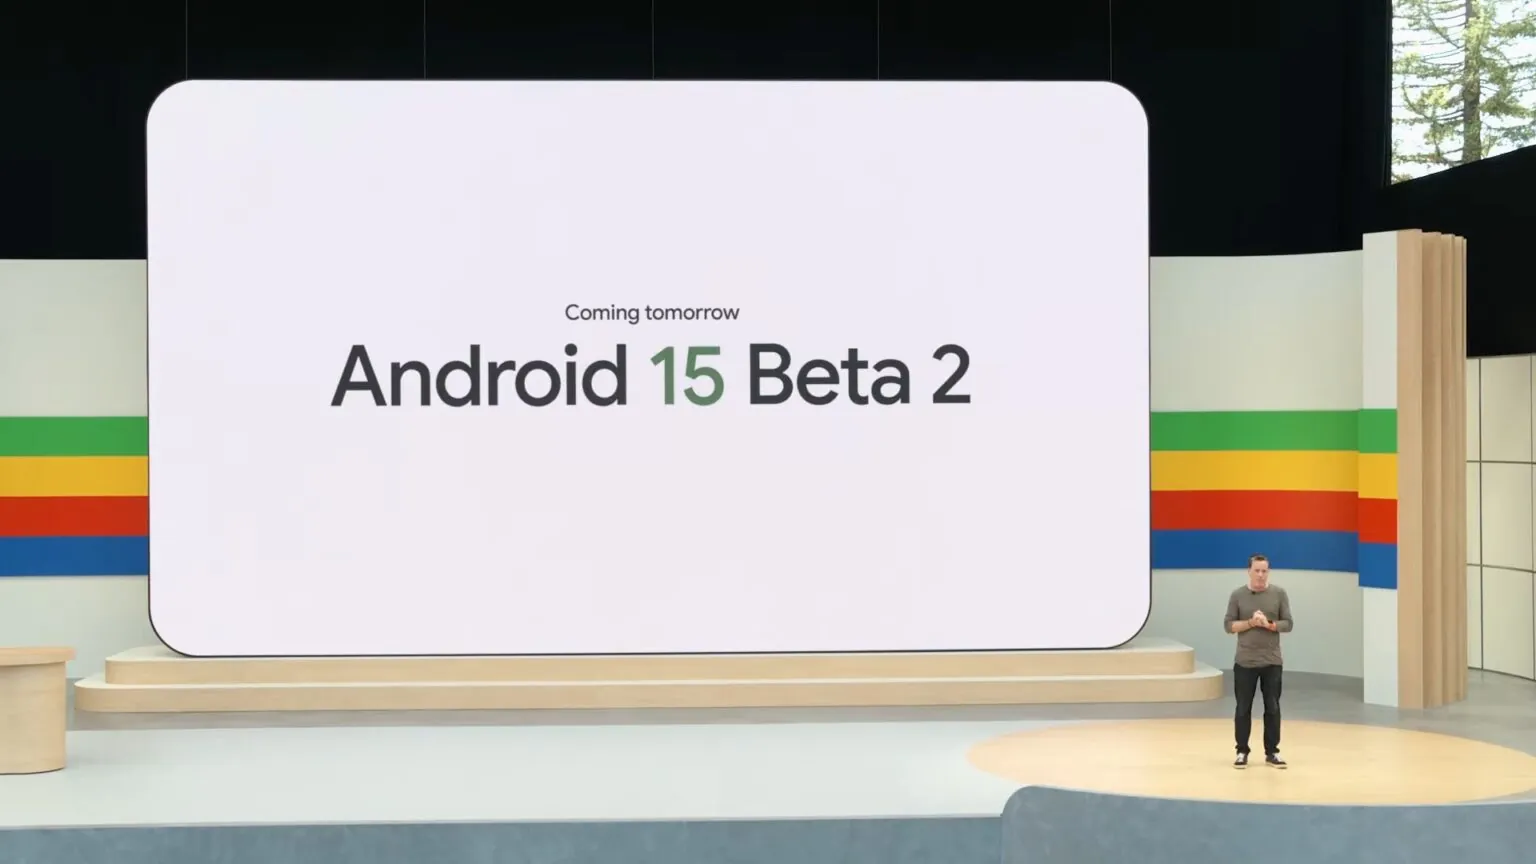 Android 15 Beta 2 to be released tomorrow - Google - News